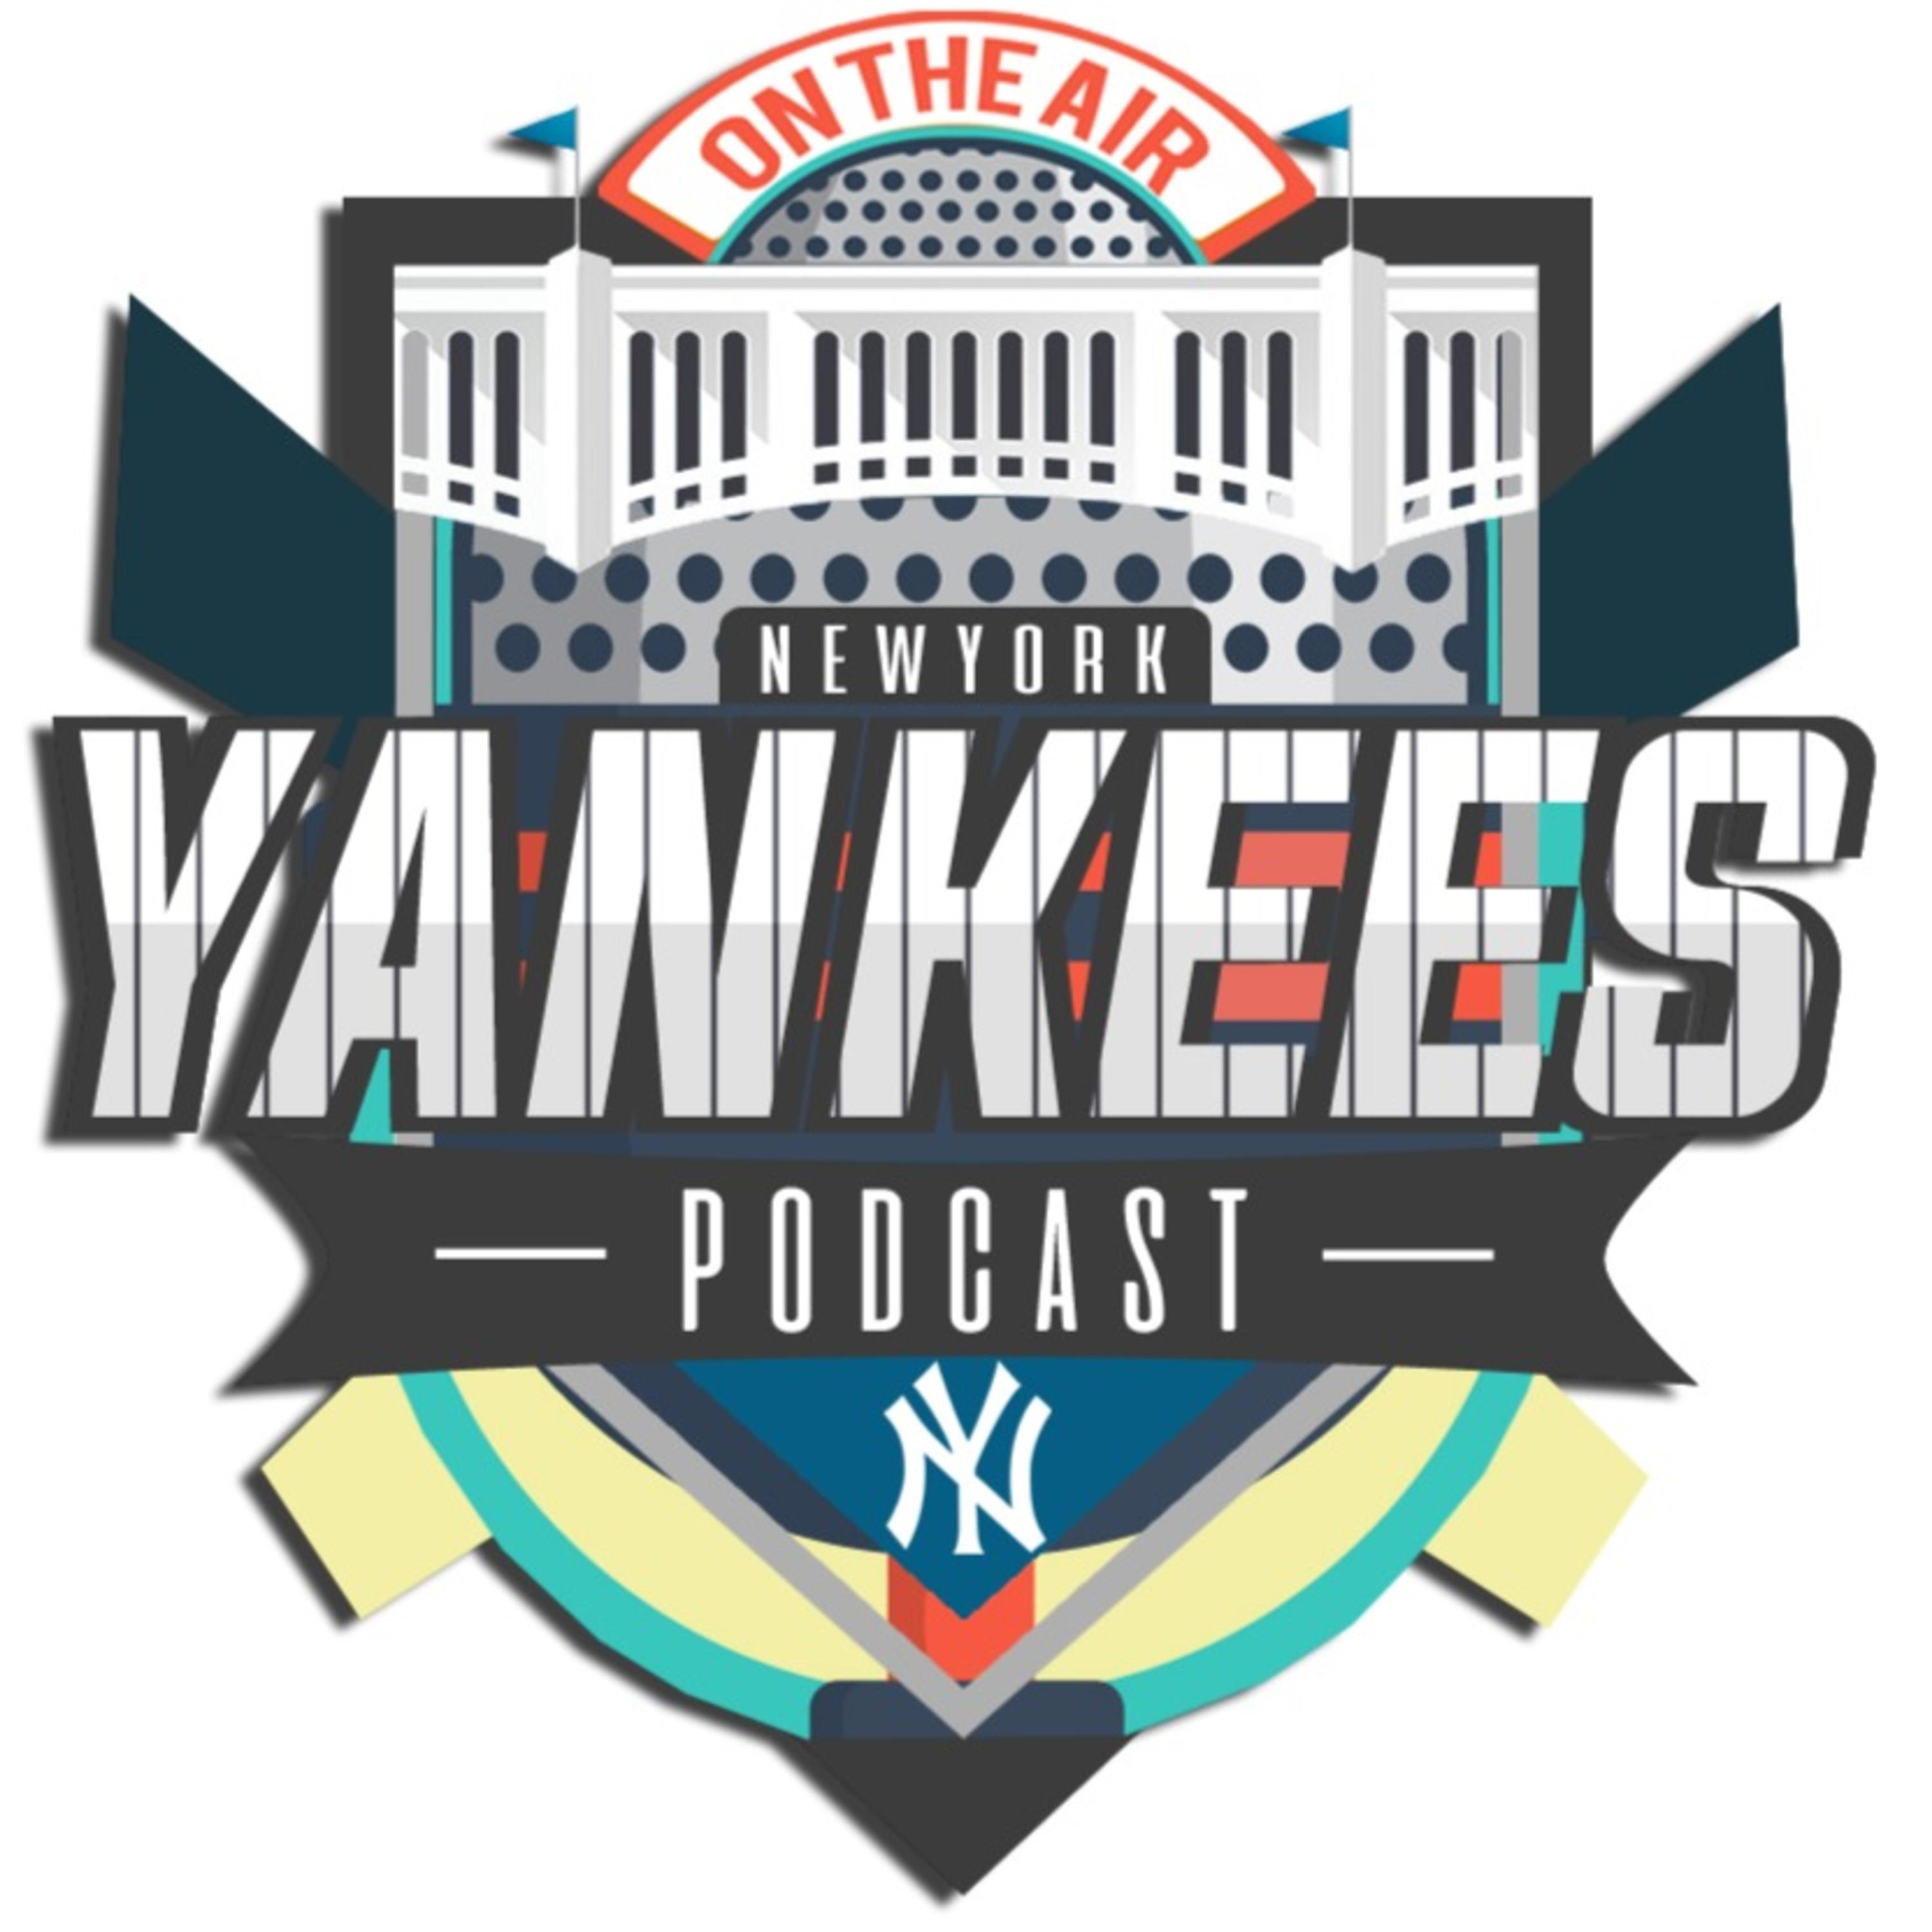 New York Yankees Hungary Podcast - Bé x DS! x Mike - Episode 12